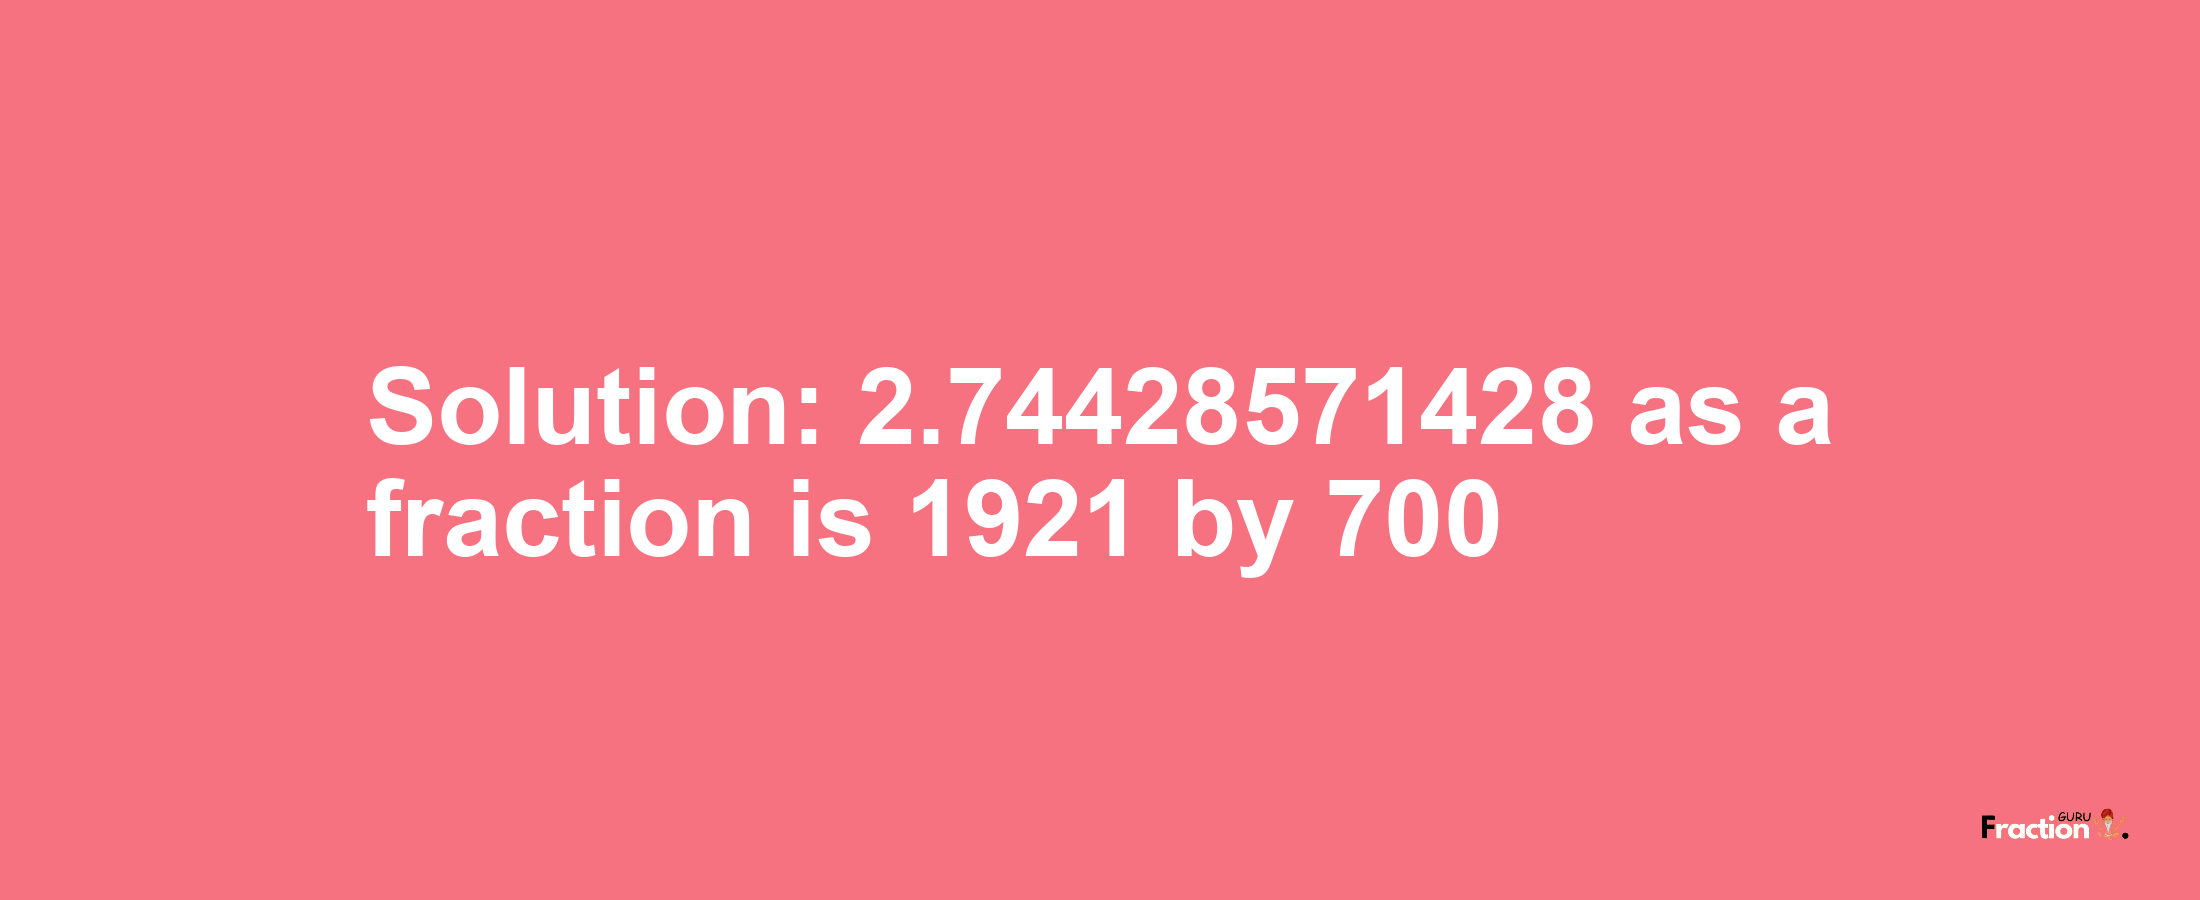 Solution:2.74428571428 as a fraction is 1921/700